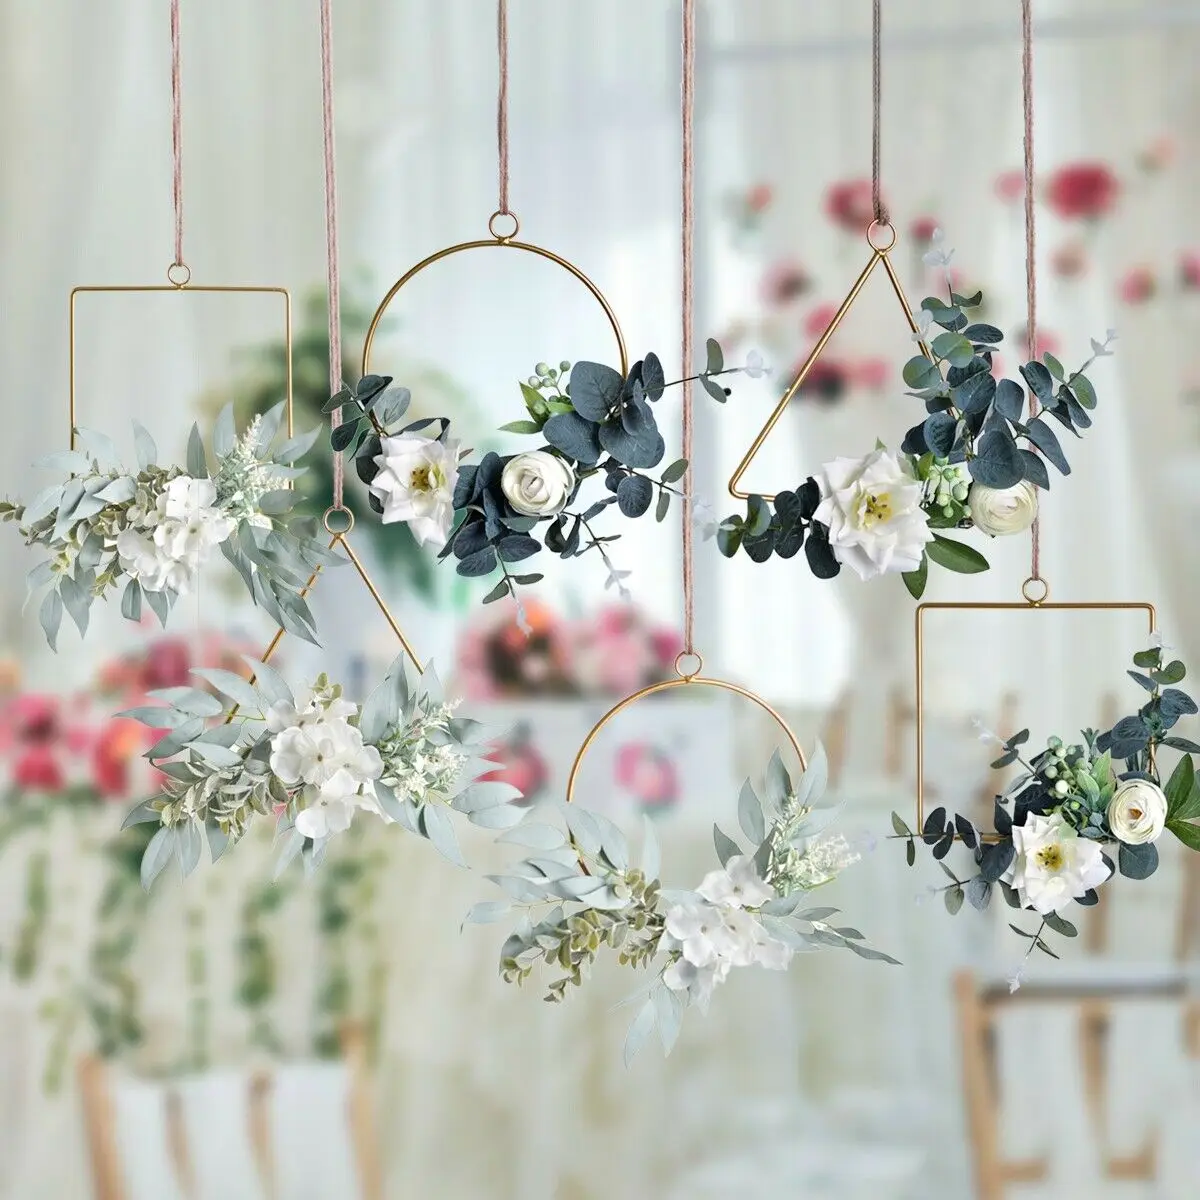 Healifty 3PCS Metal Hanging Hoop Floral Wreath Geometric Wire Round Square Triangle Artificial Rose Flower Wall Hanging Hoop Garland for Wedding Party Nursery Wall Home Decoration